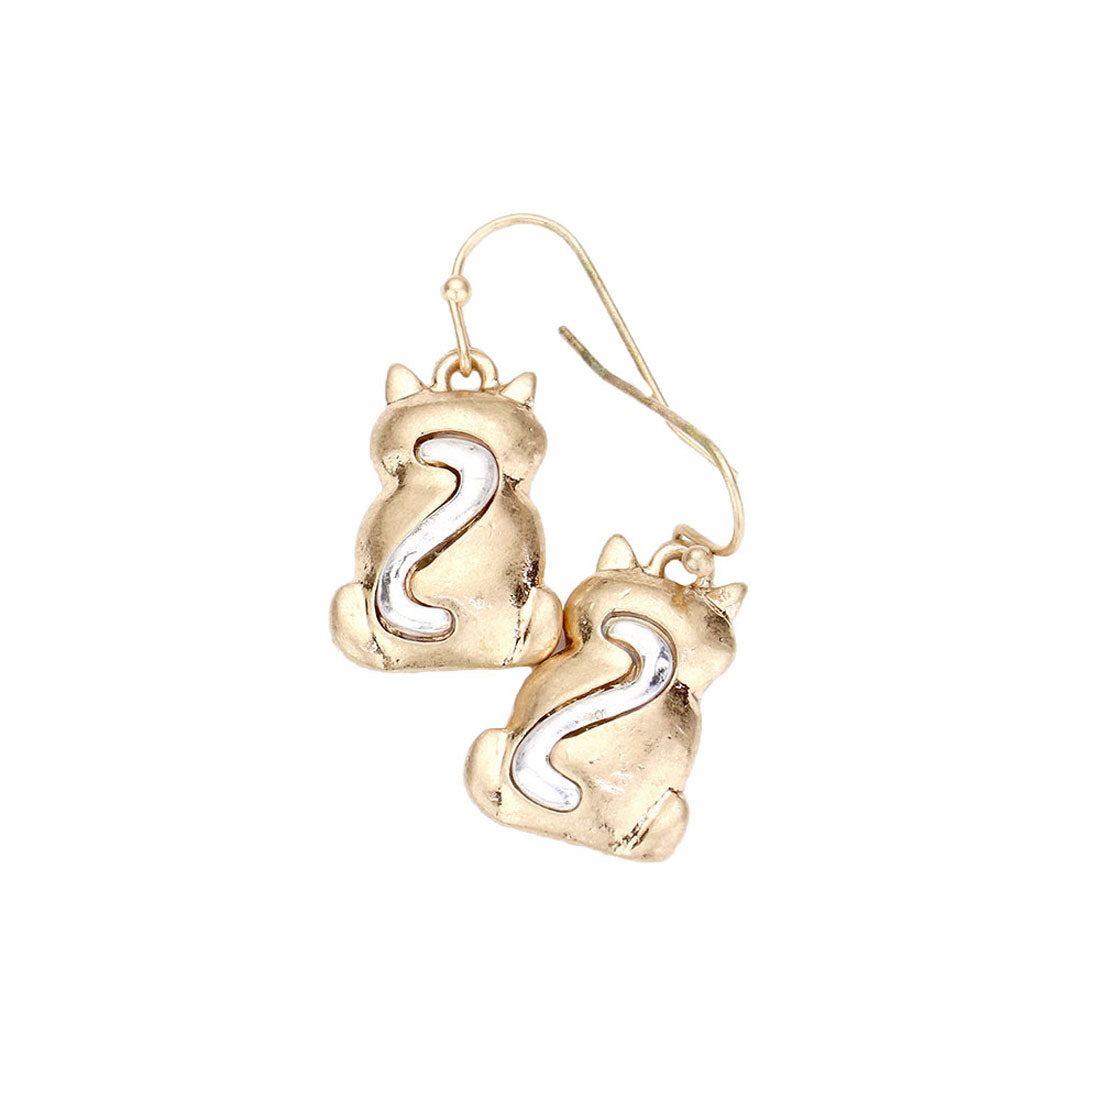 Gold Two Tone Metal Cat Dangle Earrings; get into the Christmas spirit with our gorgeous handcrafted Christmas earrings, they will dangle on your earlobes & bring a smile to those who look at you. Perfect Gift December Birthdays, Christmas, Stocking Stuffers, Secret Santa, BFF, etc 